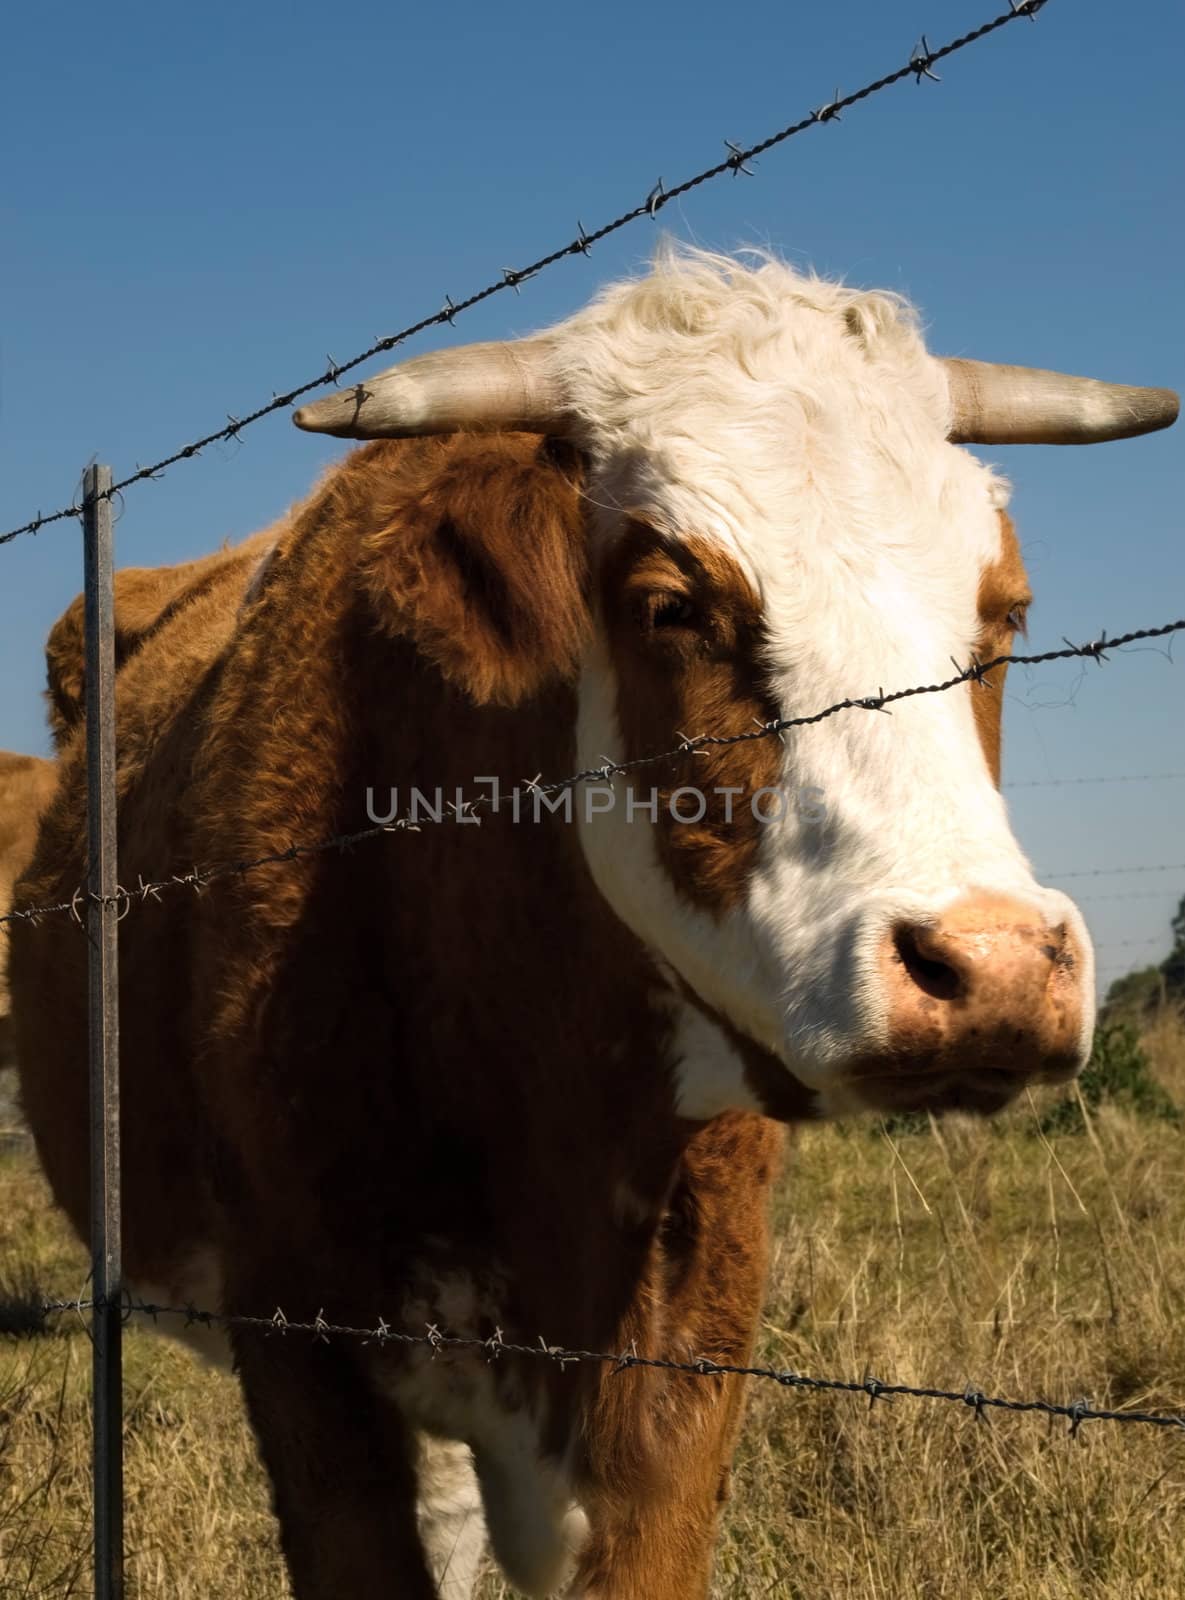 restrained simmental cow - barbed wire restraining fence to restrain farm animals